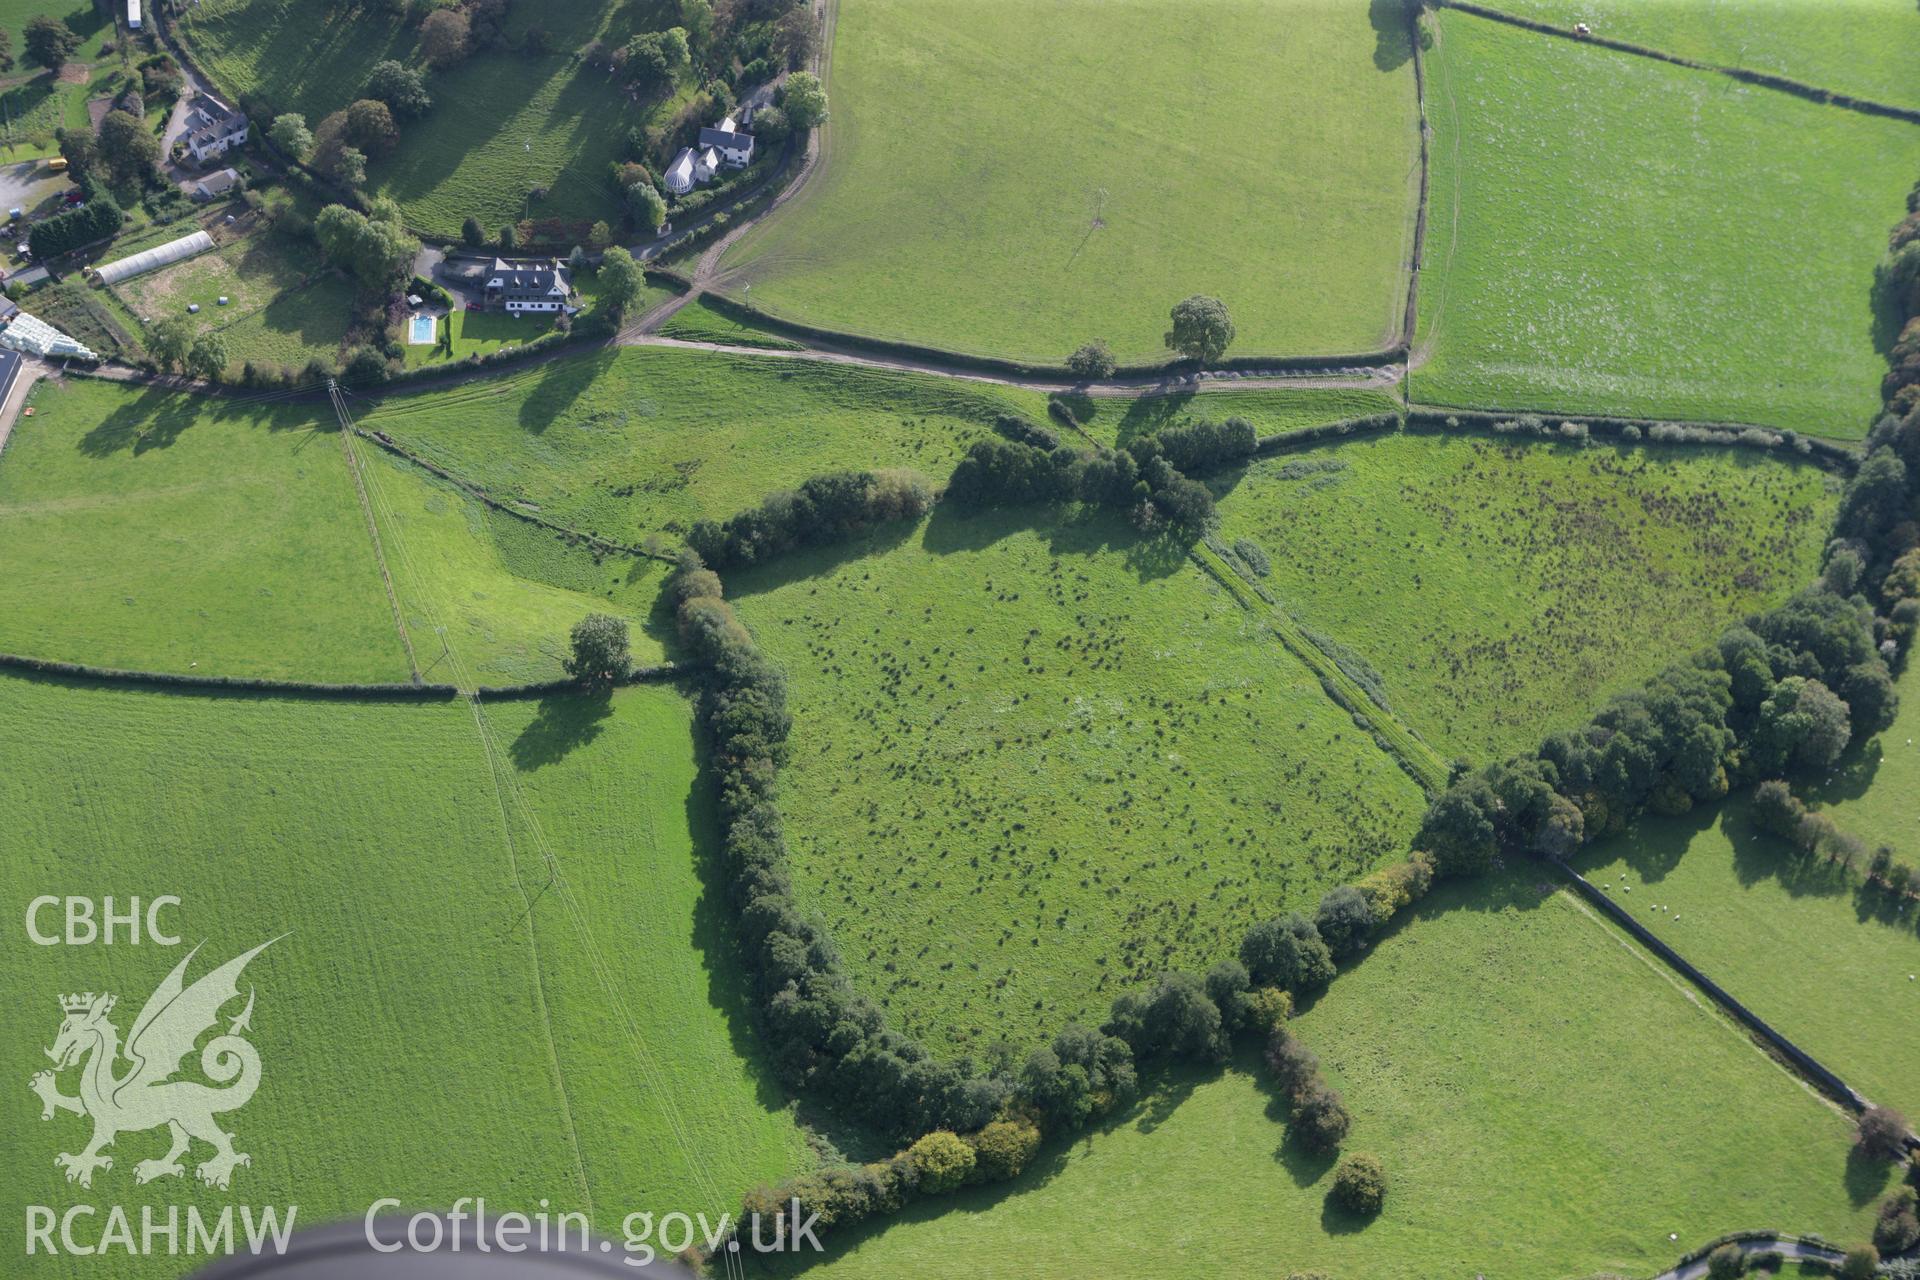 RCAHMW colour oblique aerial photograph of possible former ponds at Hendy. Taken on 13 October 2009 by Toby Driver